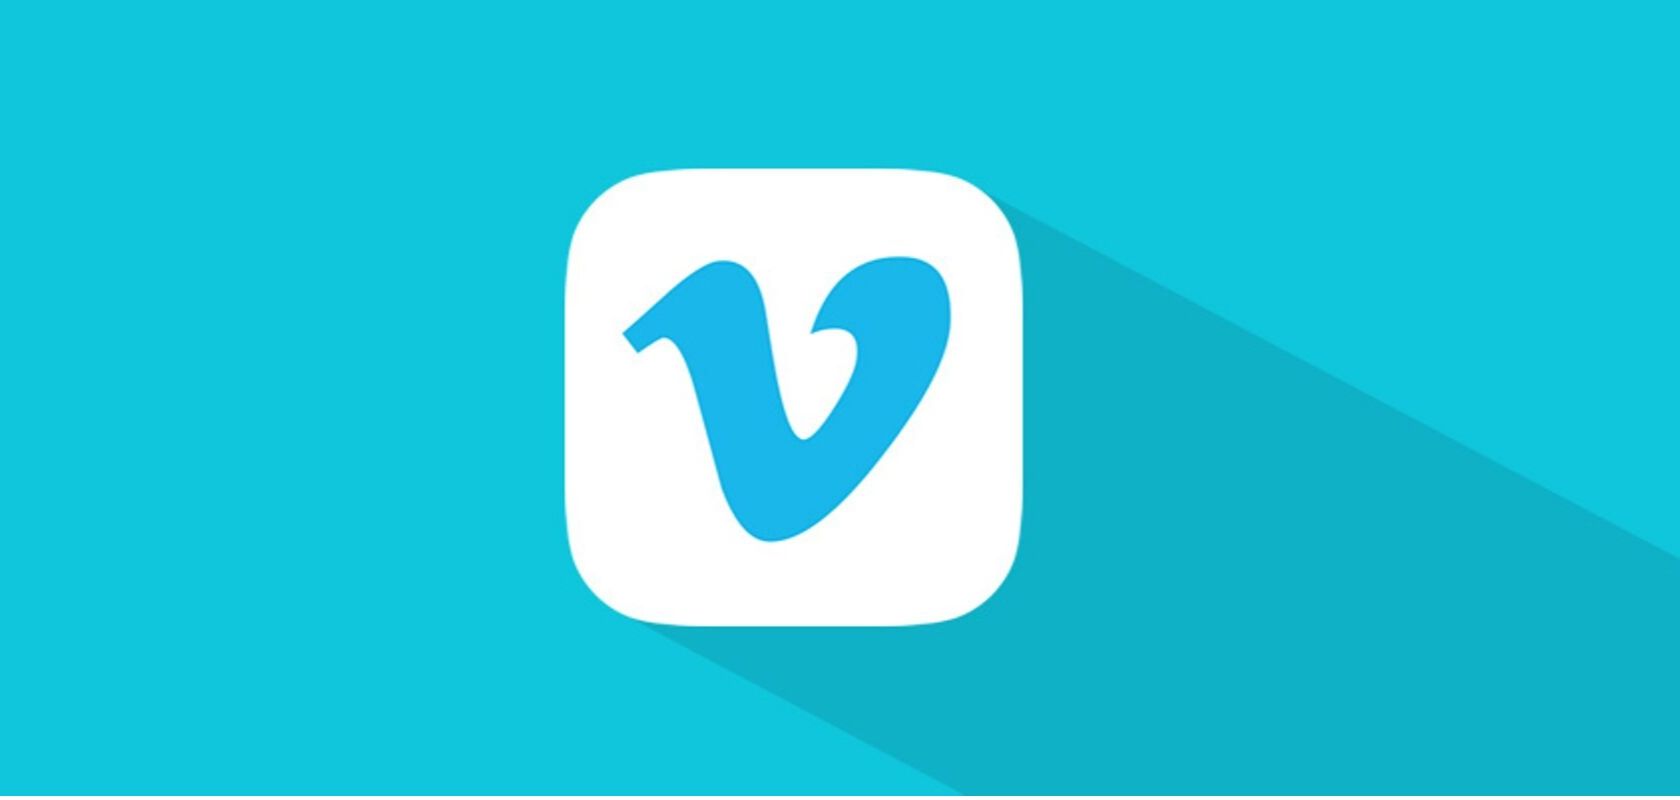 Vimeo has more recently been pivoting its business model towards... 